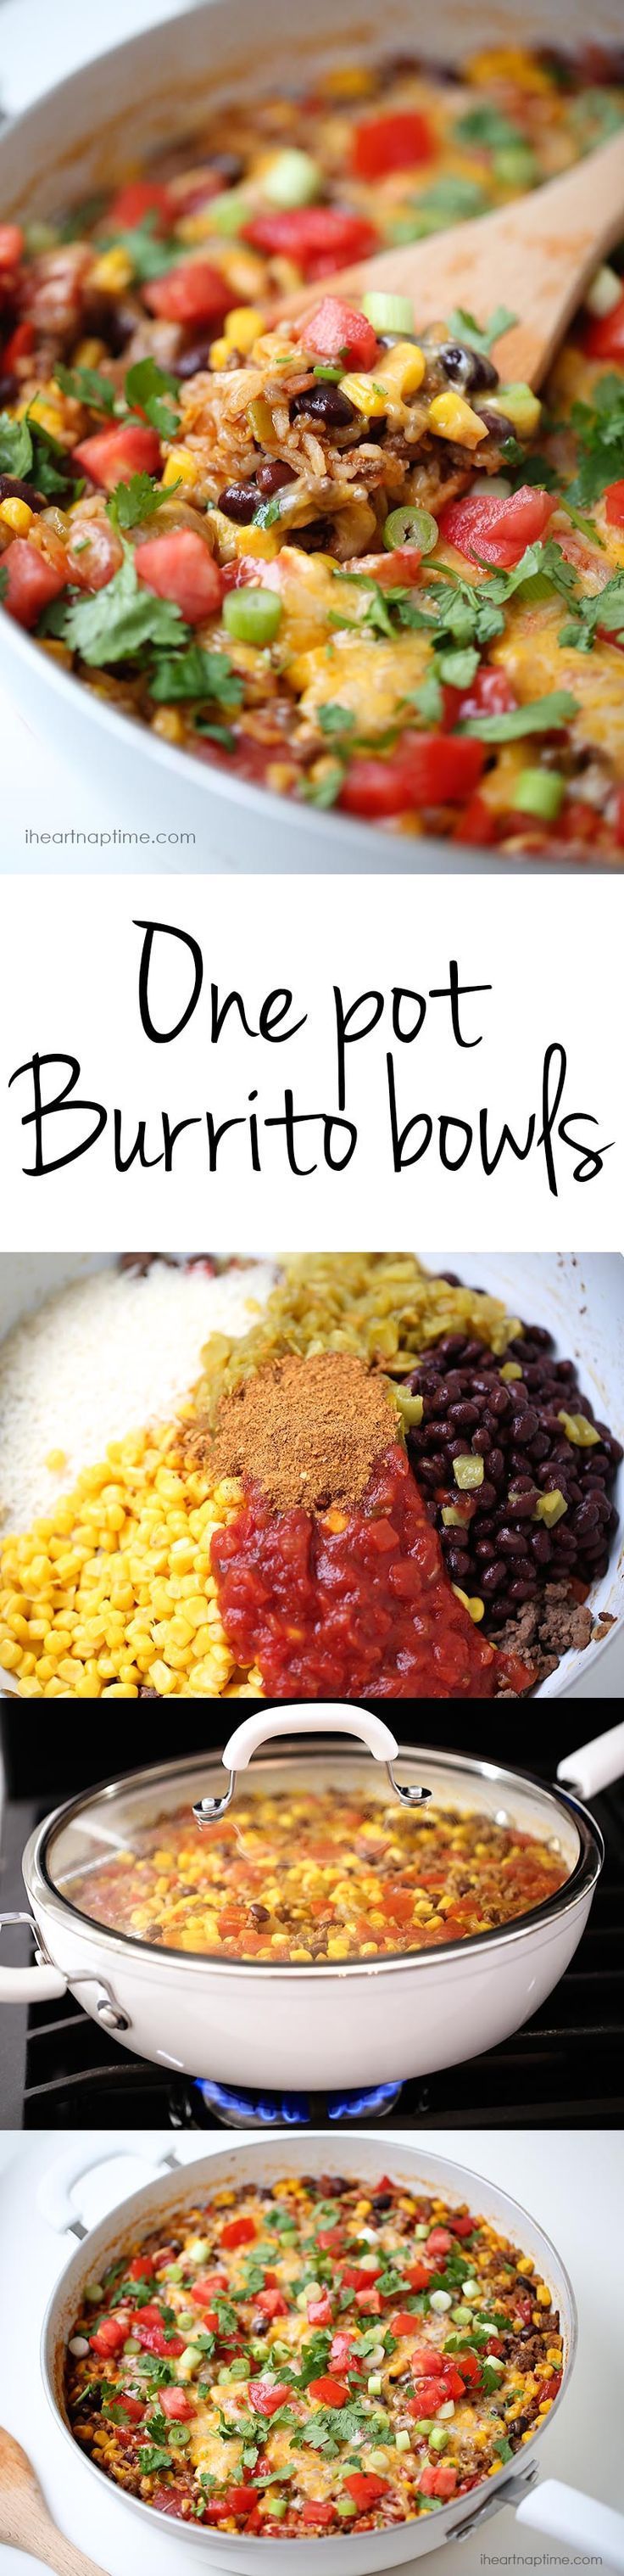 One pot burrito bowls recipe …YUM! Done in 30 minutes, perfect for busy nights!